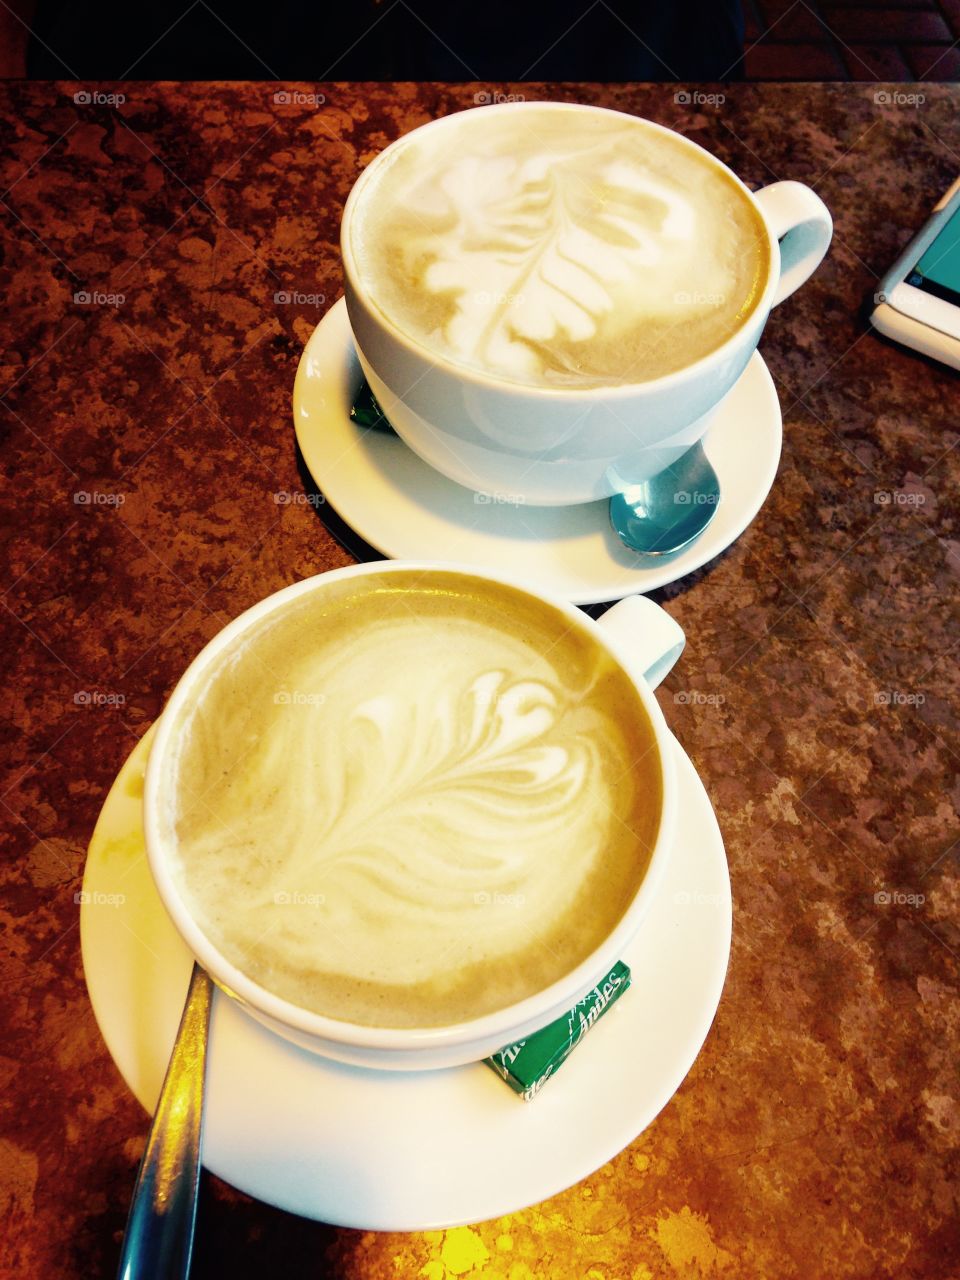 Lattes. Hot lattes and good company on a cold day. 